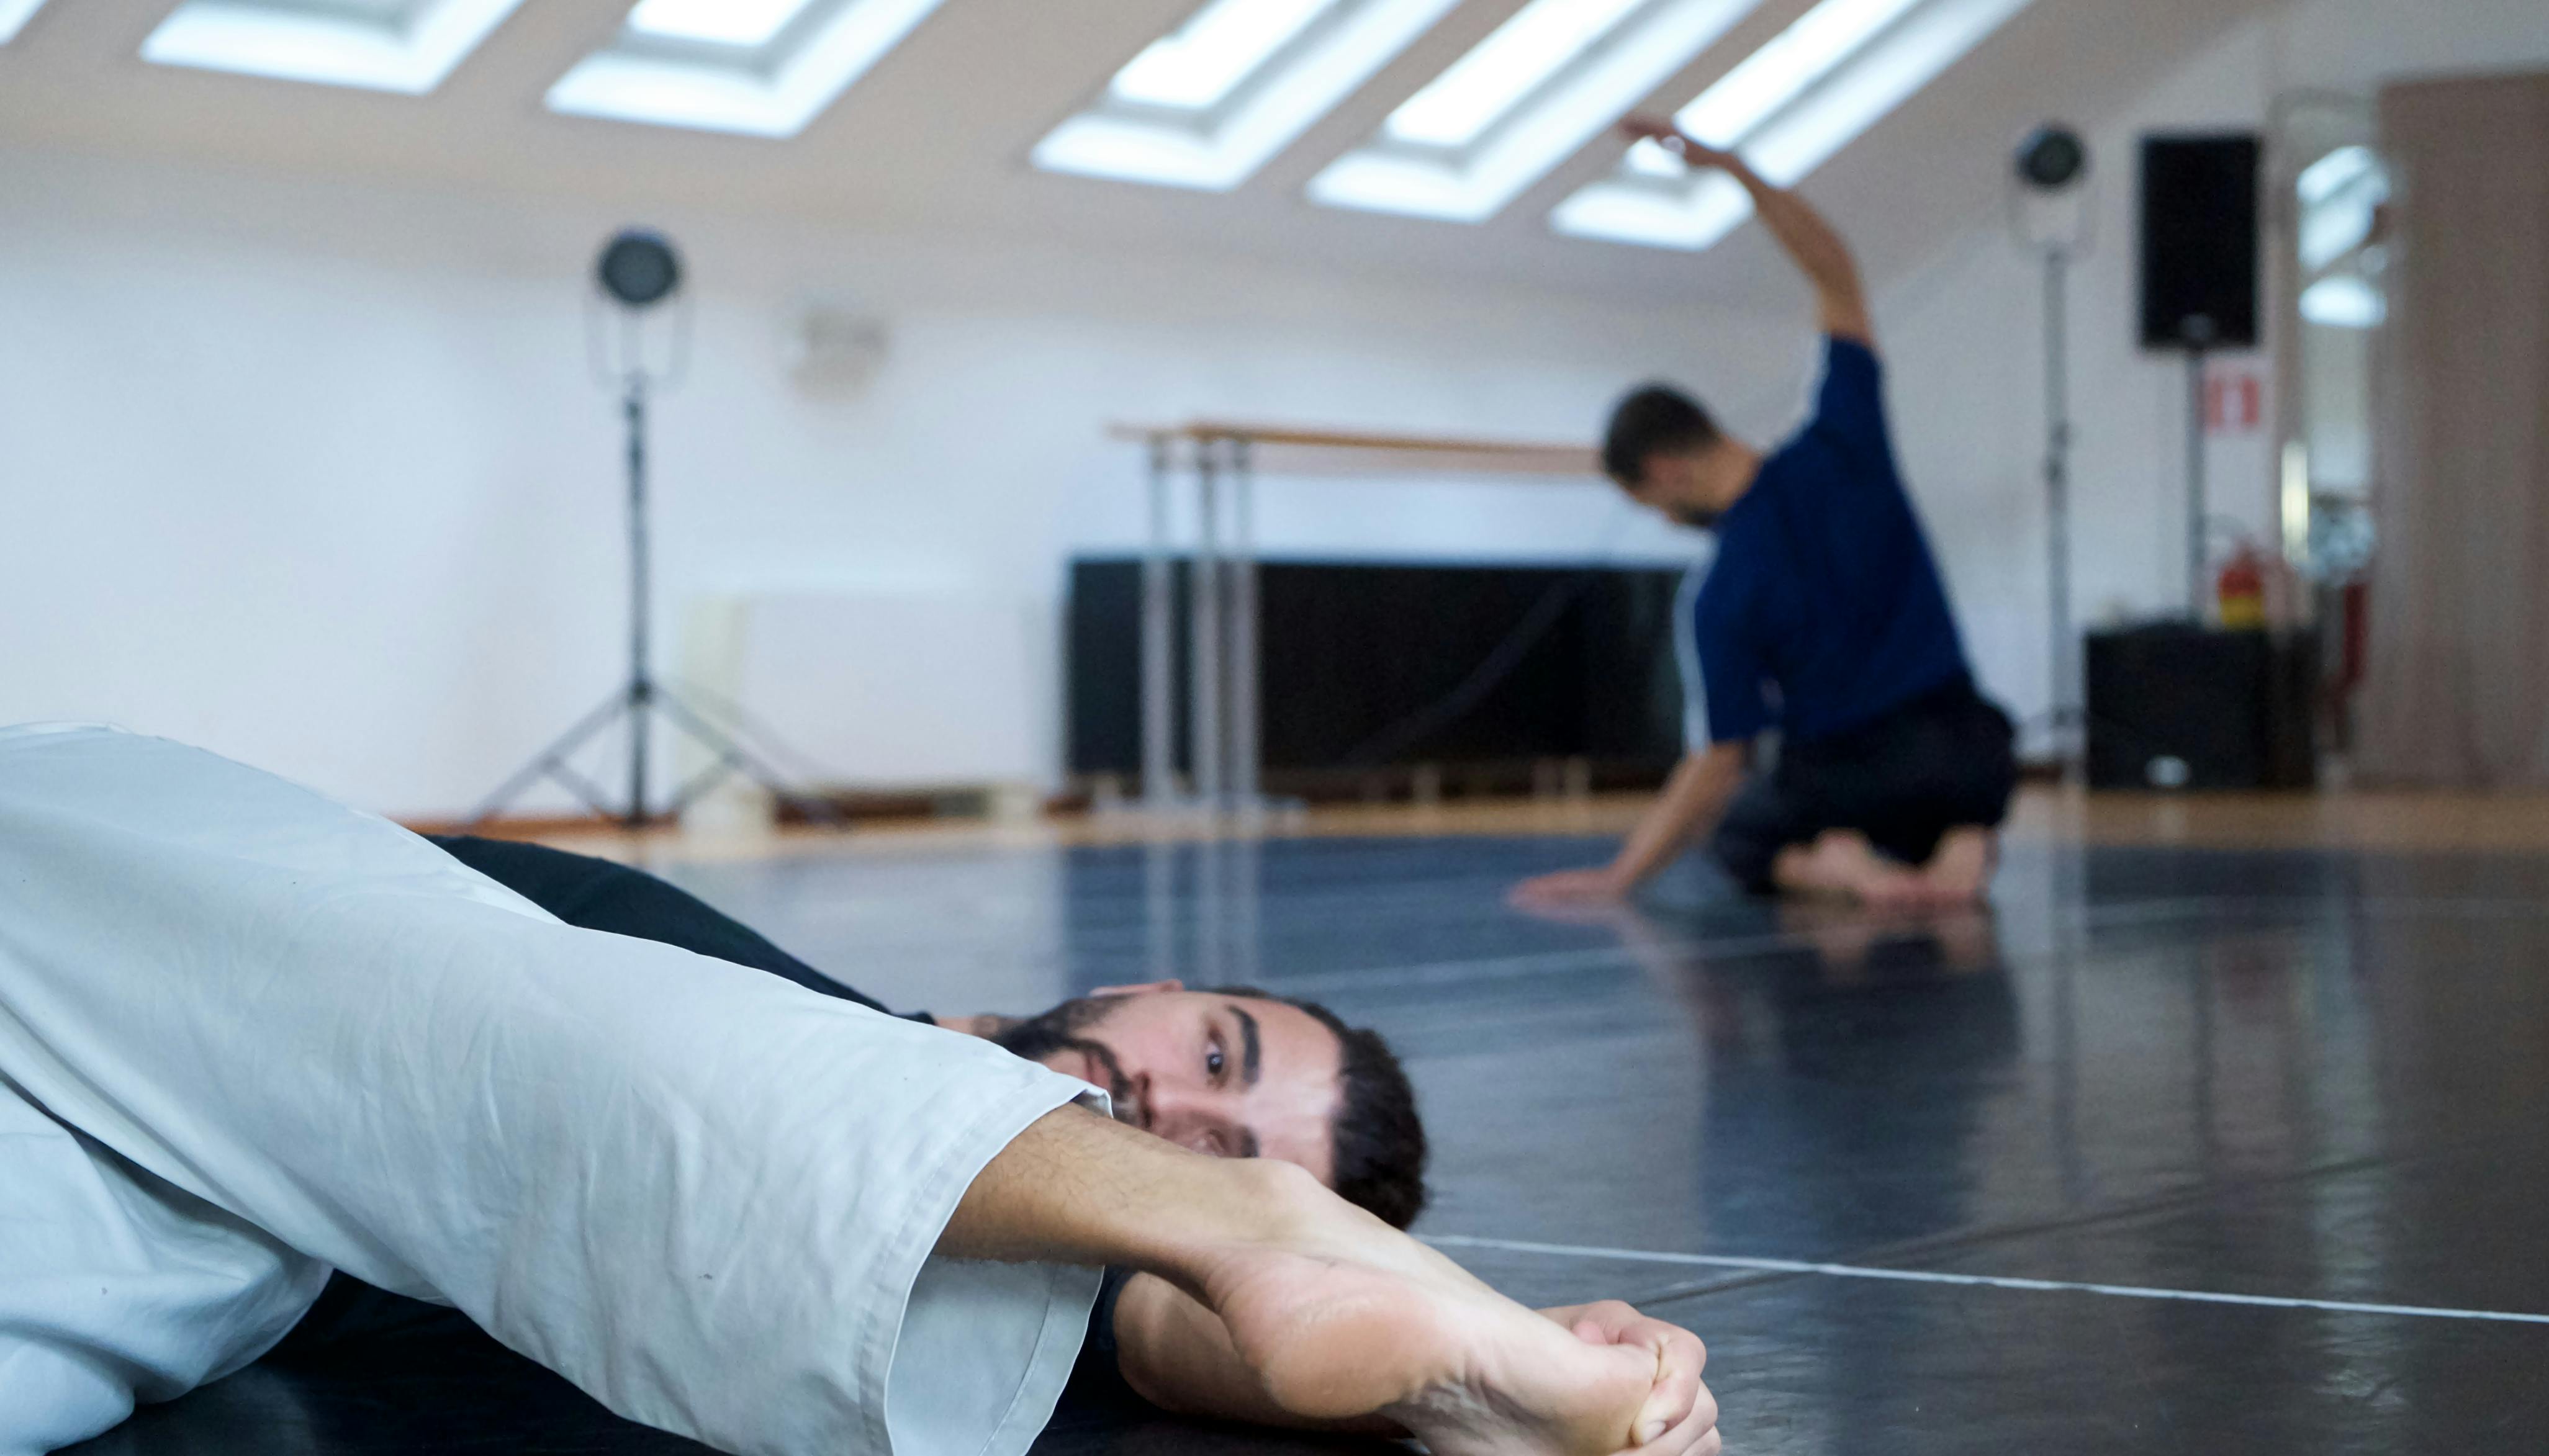 The two choreographers warm up before rehearsal: one of them is lying on the floor, the other on his knees stretching his back.